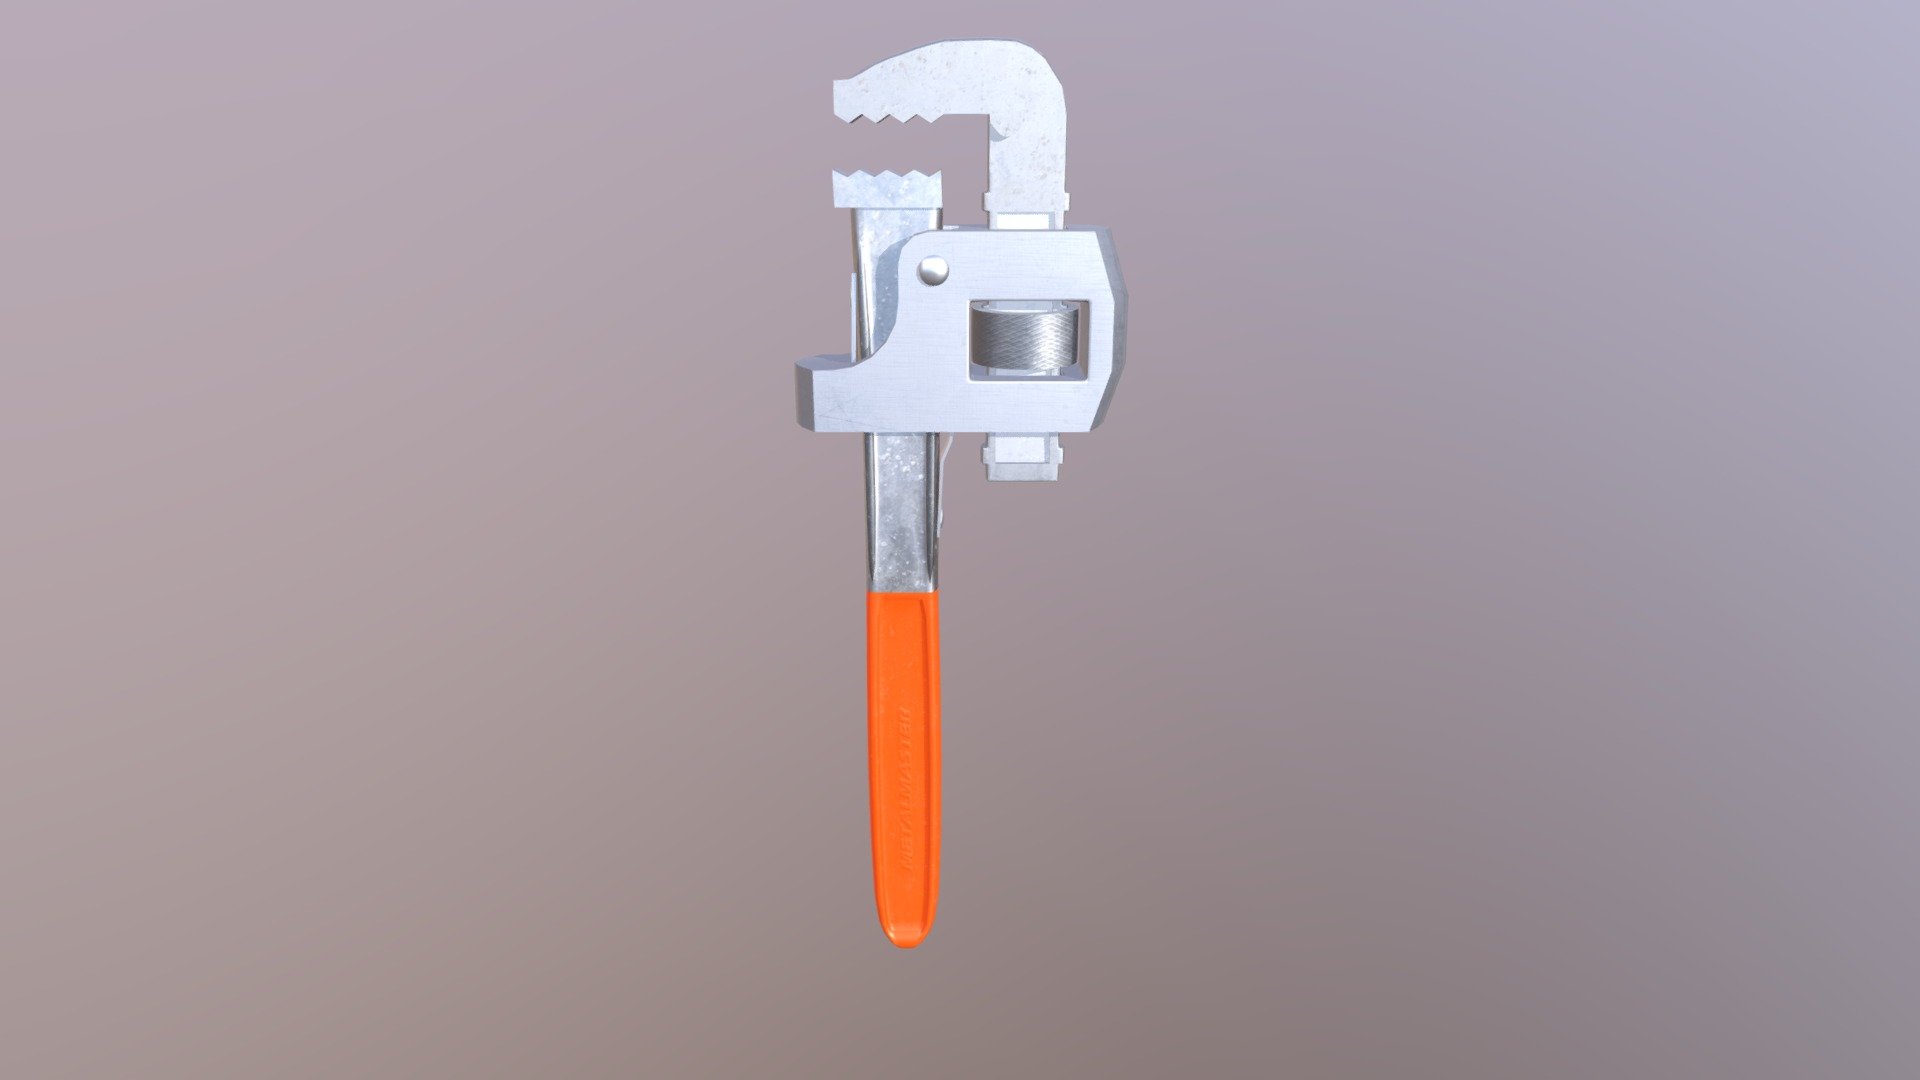 This a model of a pipe wrench modeled in Maya and texturized in Photoshop using textures from this website: https://www.textures.com/ - Pipe Wrench - 3D model by Rodrigo Issao Takara (@rodrigo.takara1505) 3d model